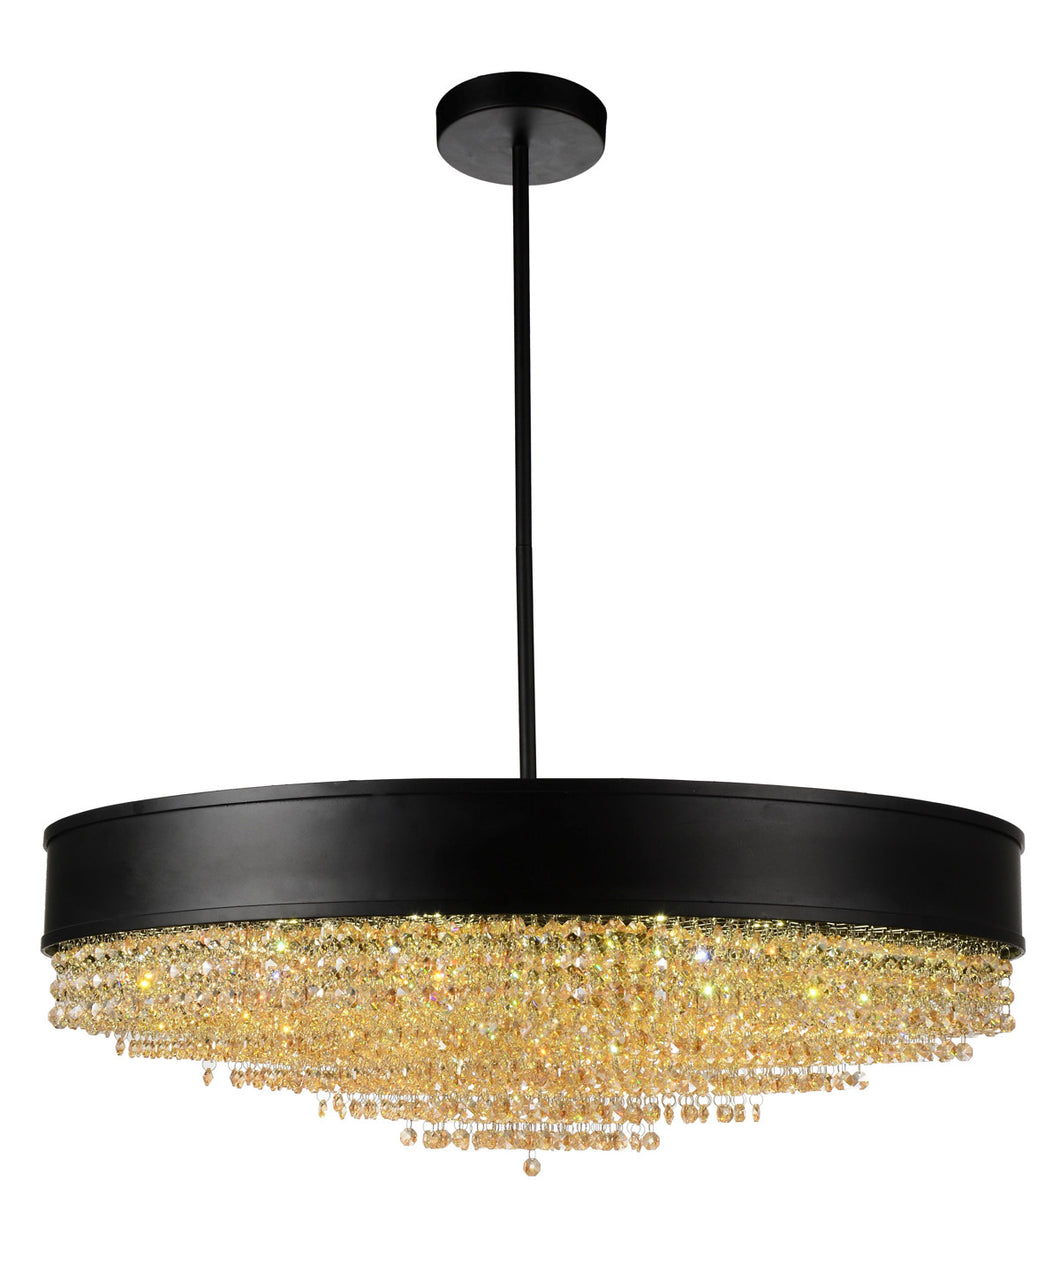 15 Light Drum Shade Chandelier with Black finish